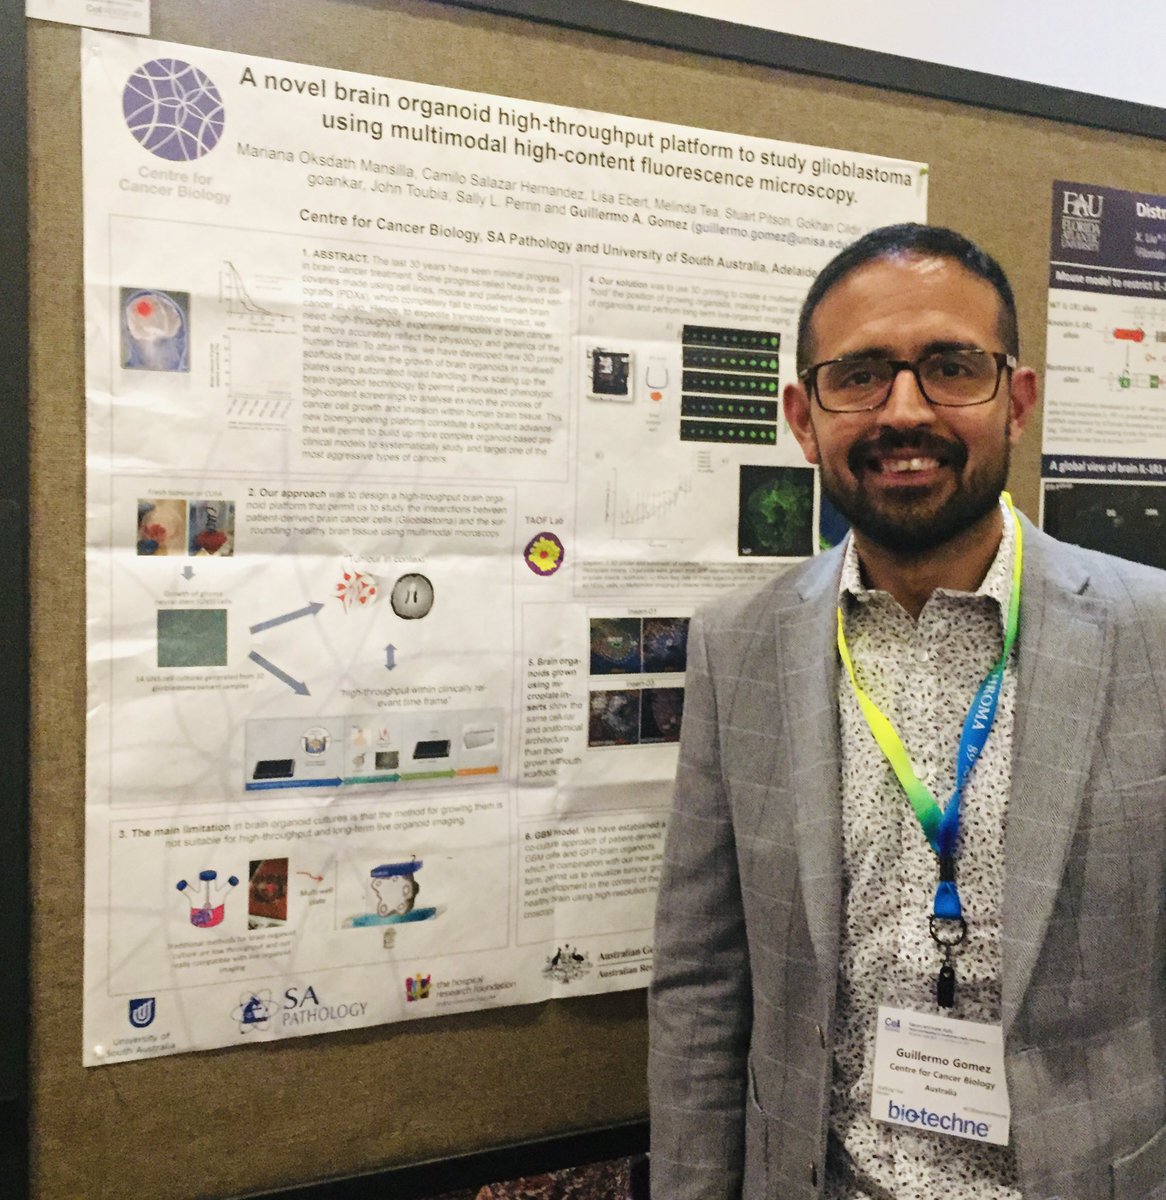 Group Leader, Dr Guillermo Gomez presenting, #brainorganoid #highthroughput platforms to research #glioblastoma at the #neuroimmune #cell #conference @CCB_Research @Esallee #stemcells #personalisedmedicines